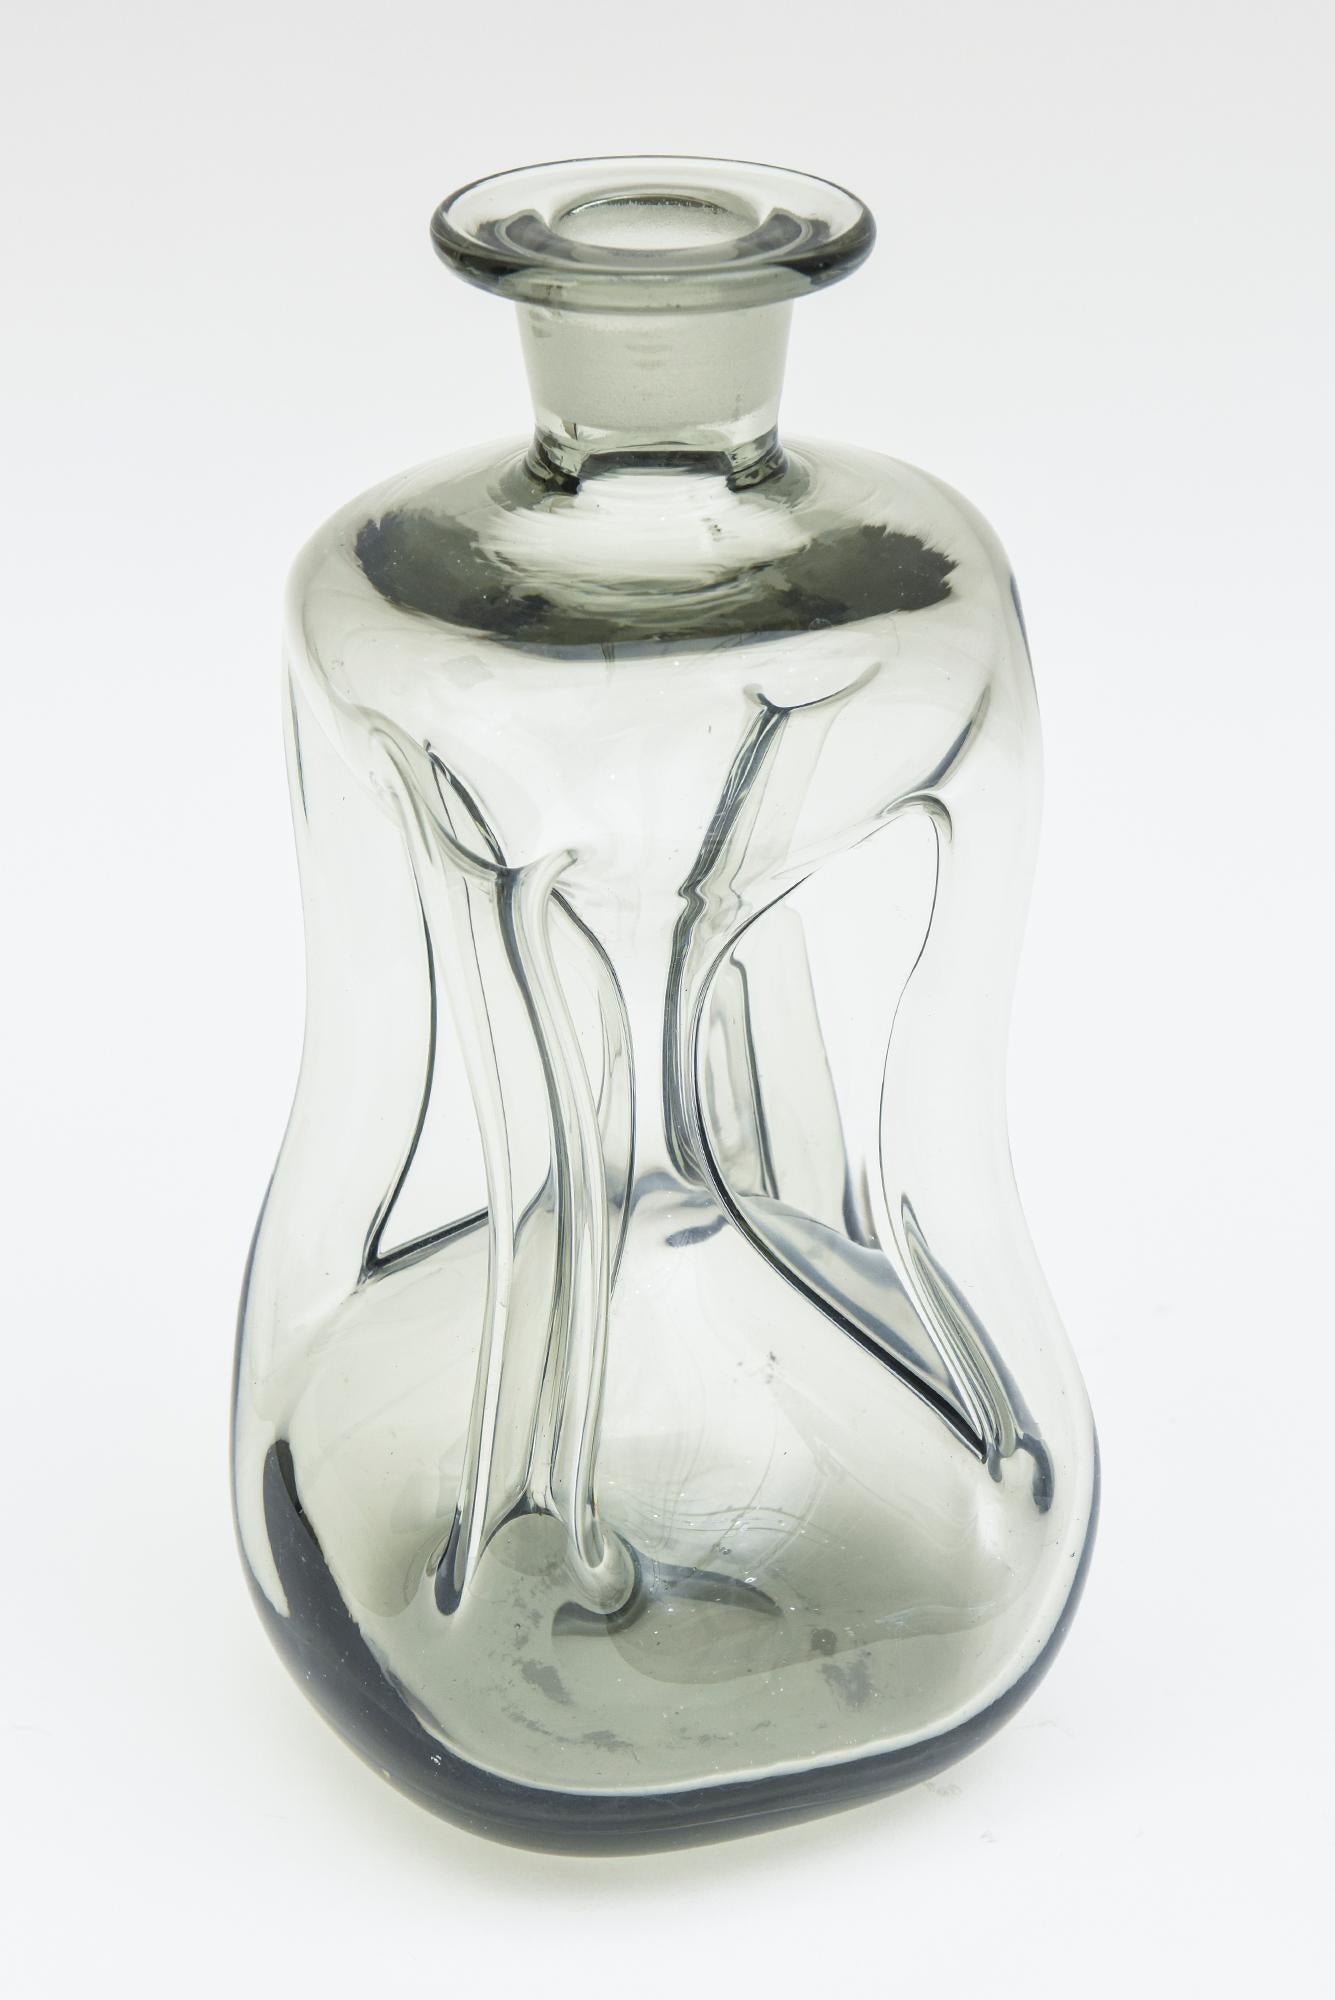 Blown Glass Smokey Gray Holmegaard Glass Cinched Decanter Bottle Rare Crown Stopper Vintage For Sale